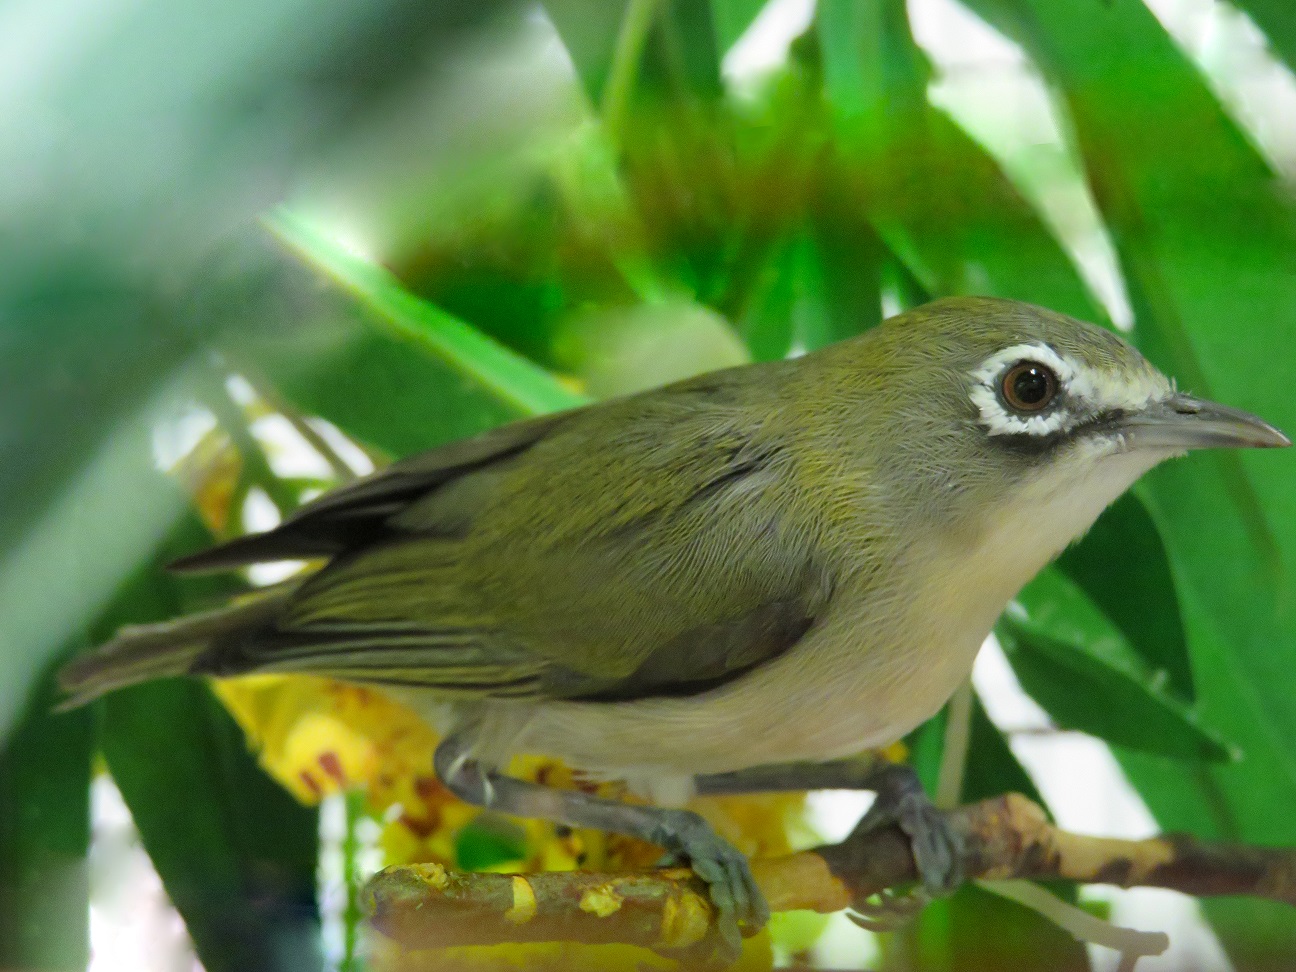 A Bridled white-eye perched on a tree branch